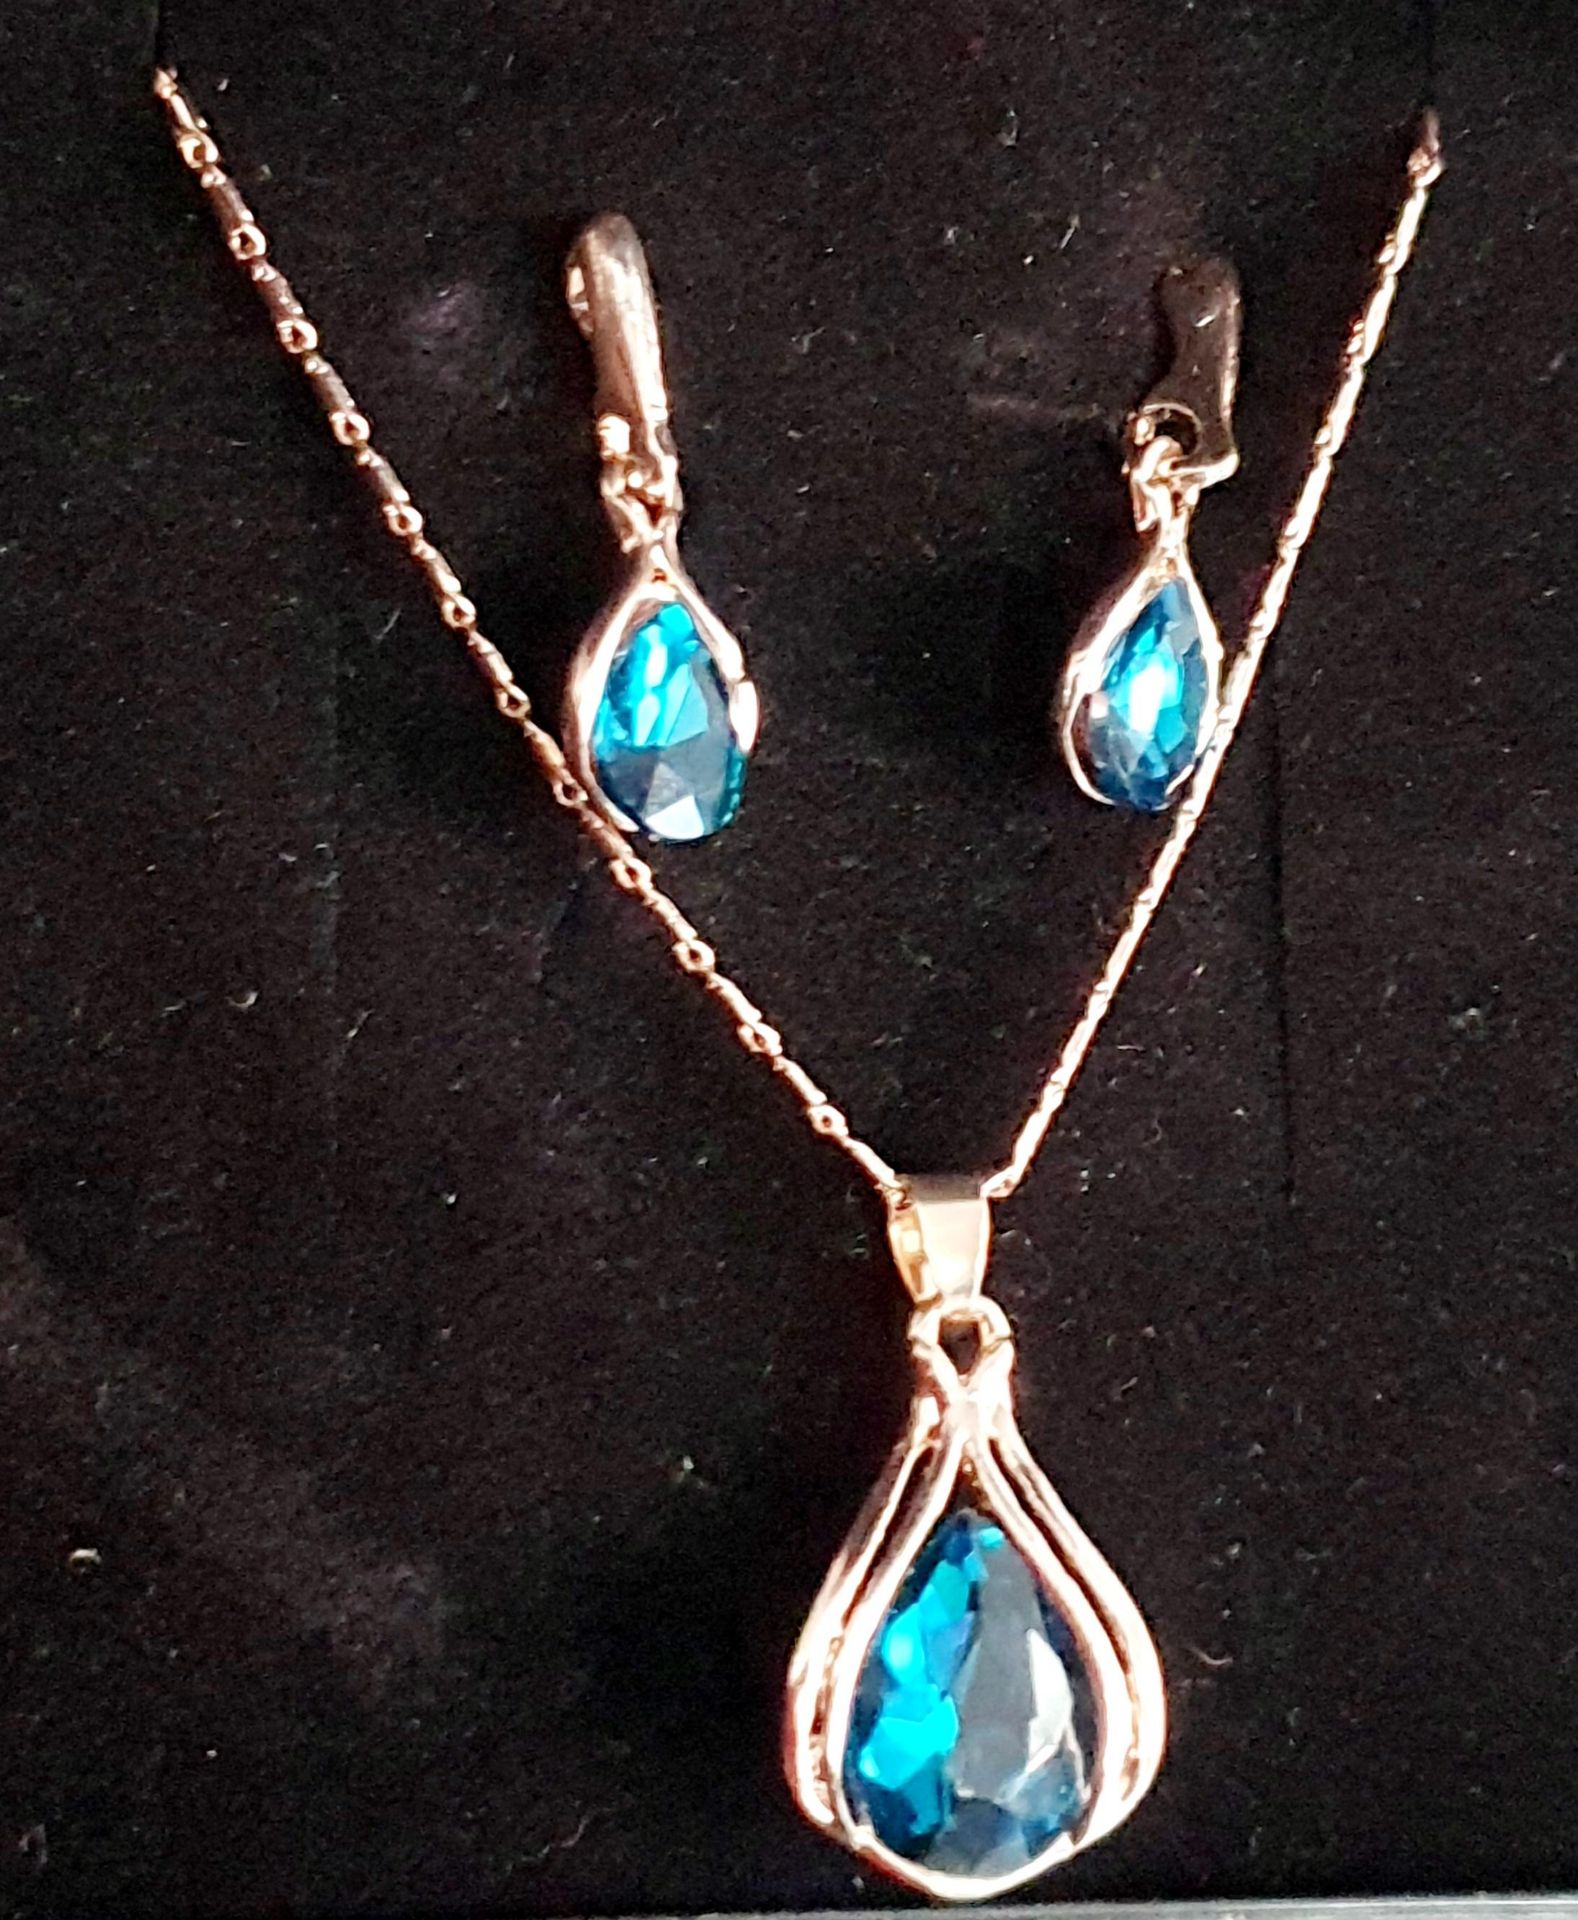 Beautiful pendant on chain with matching earrings set